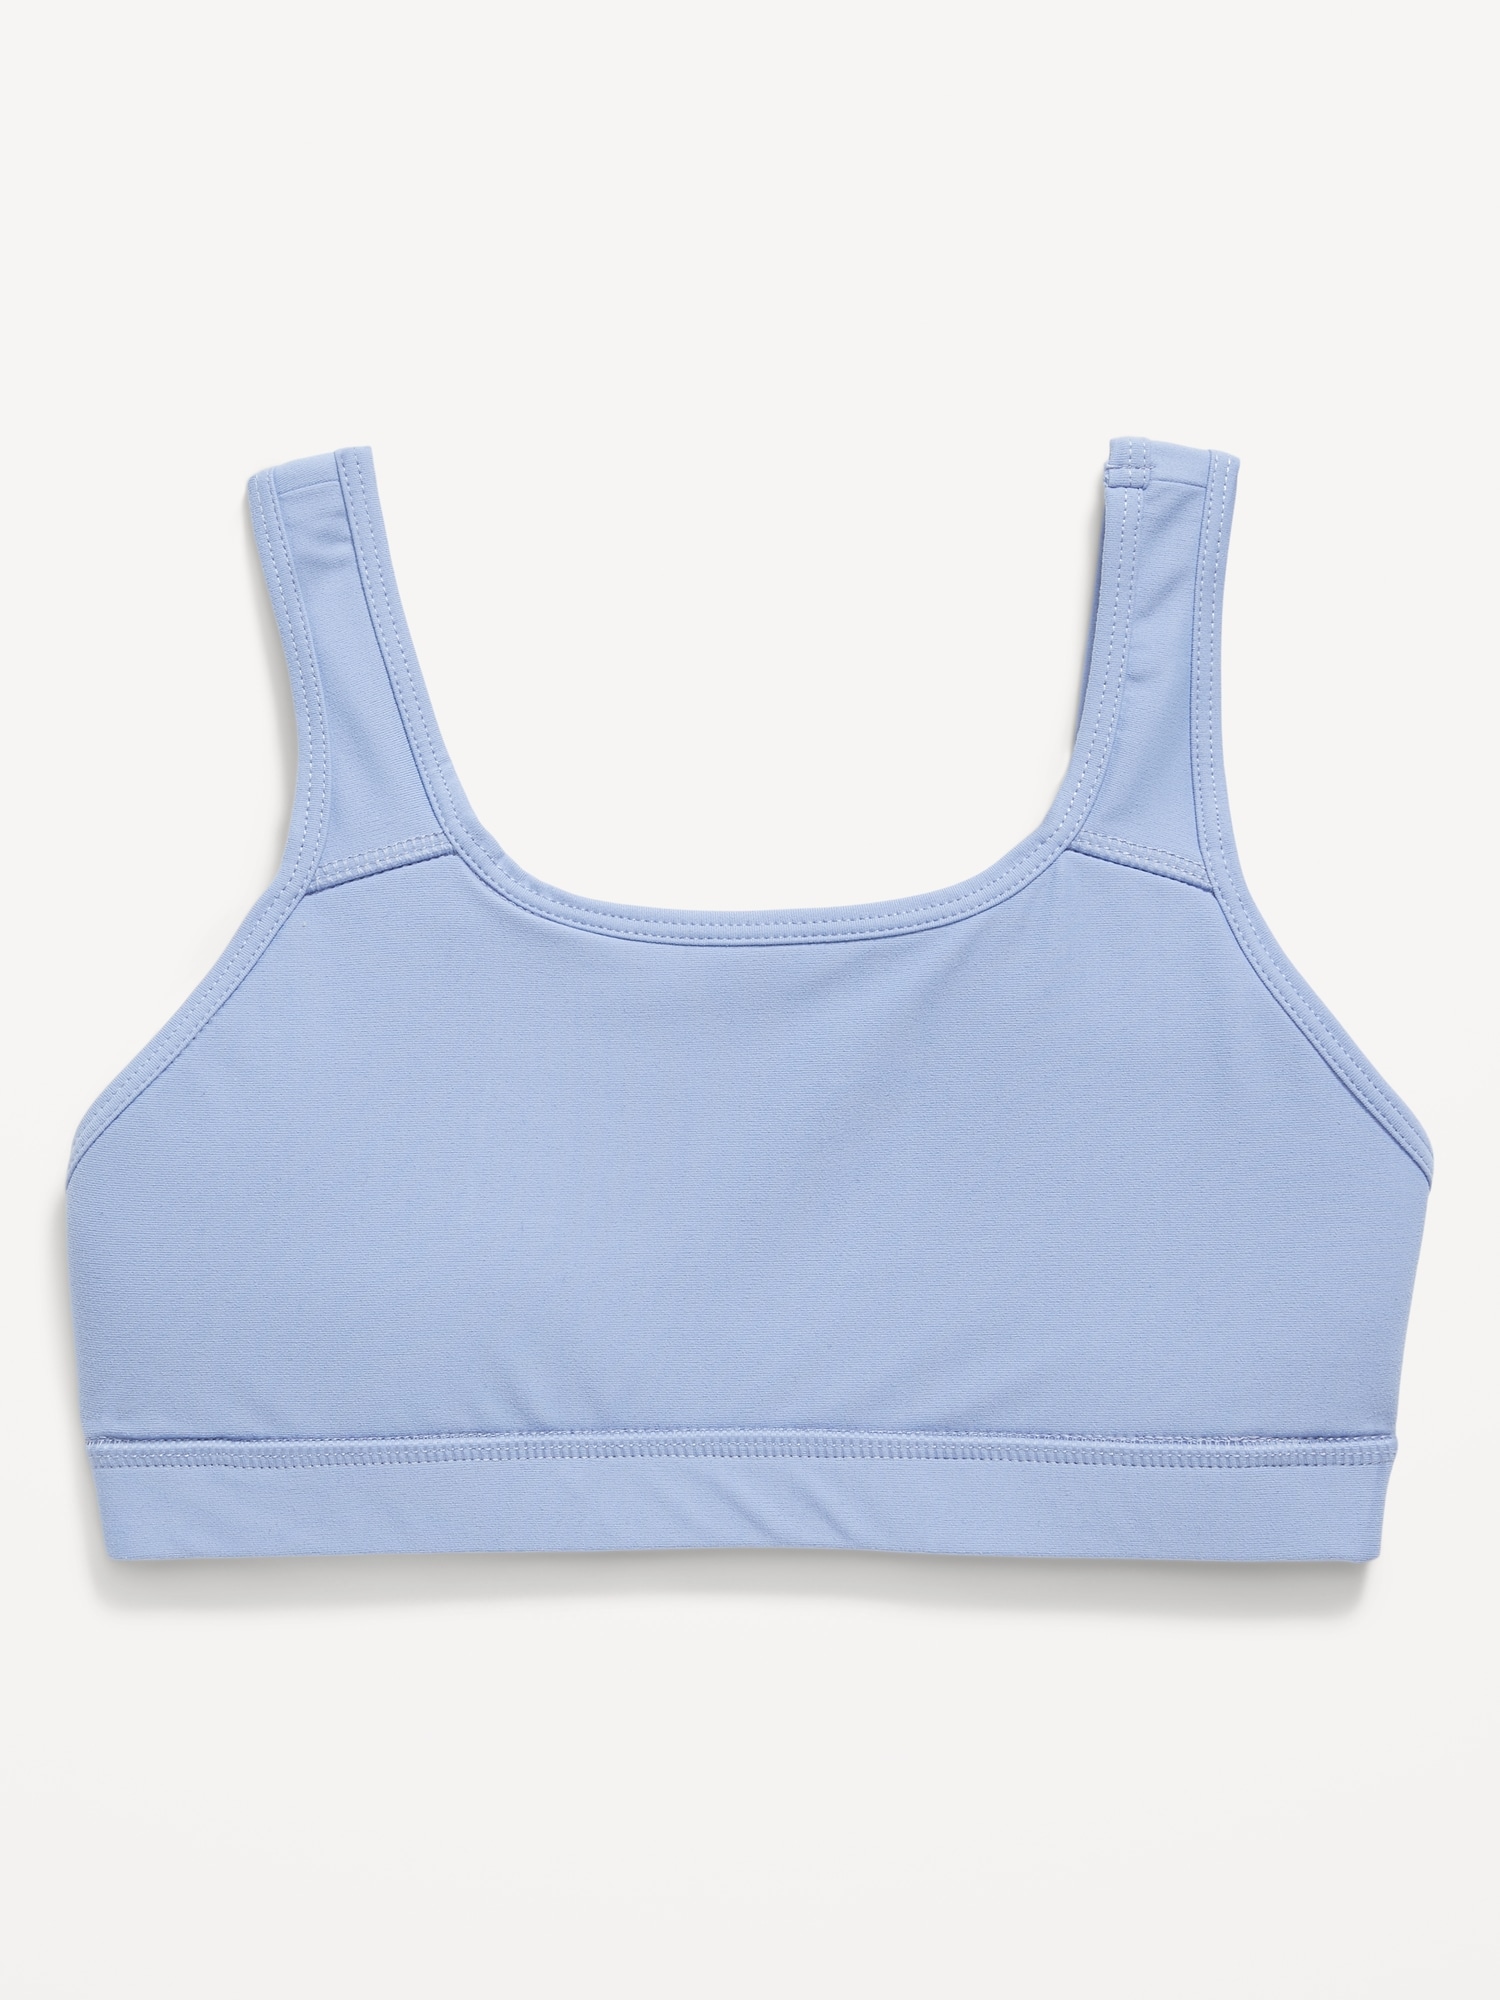 Sports Bras for Teens